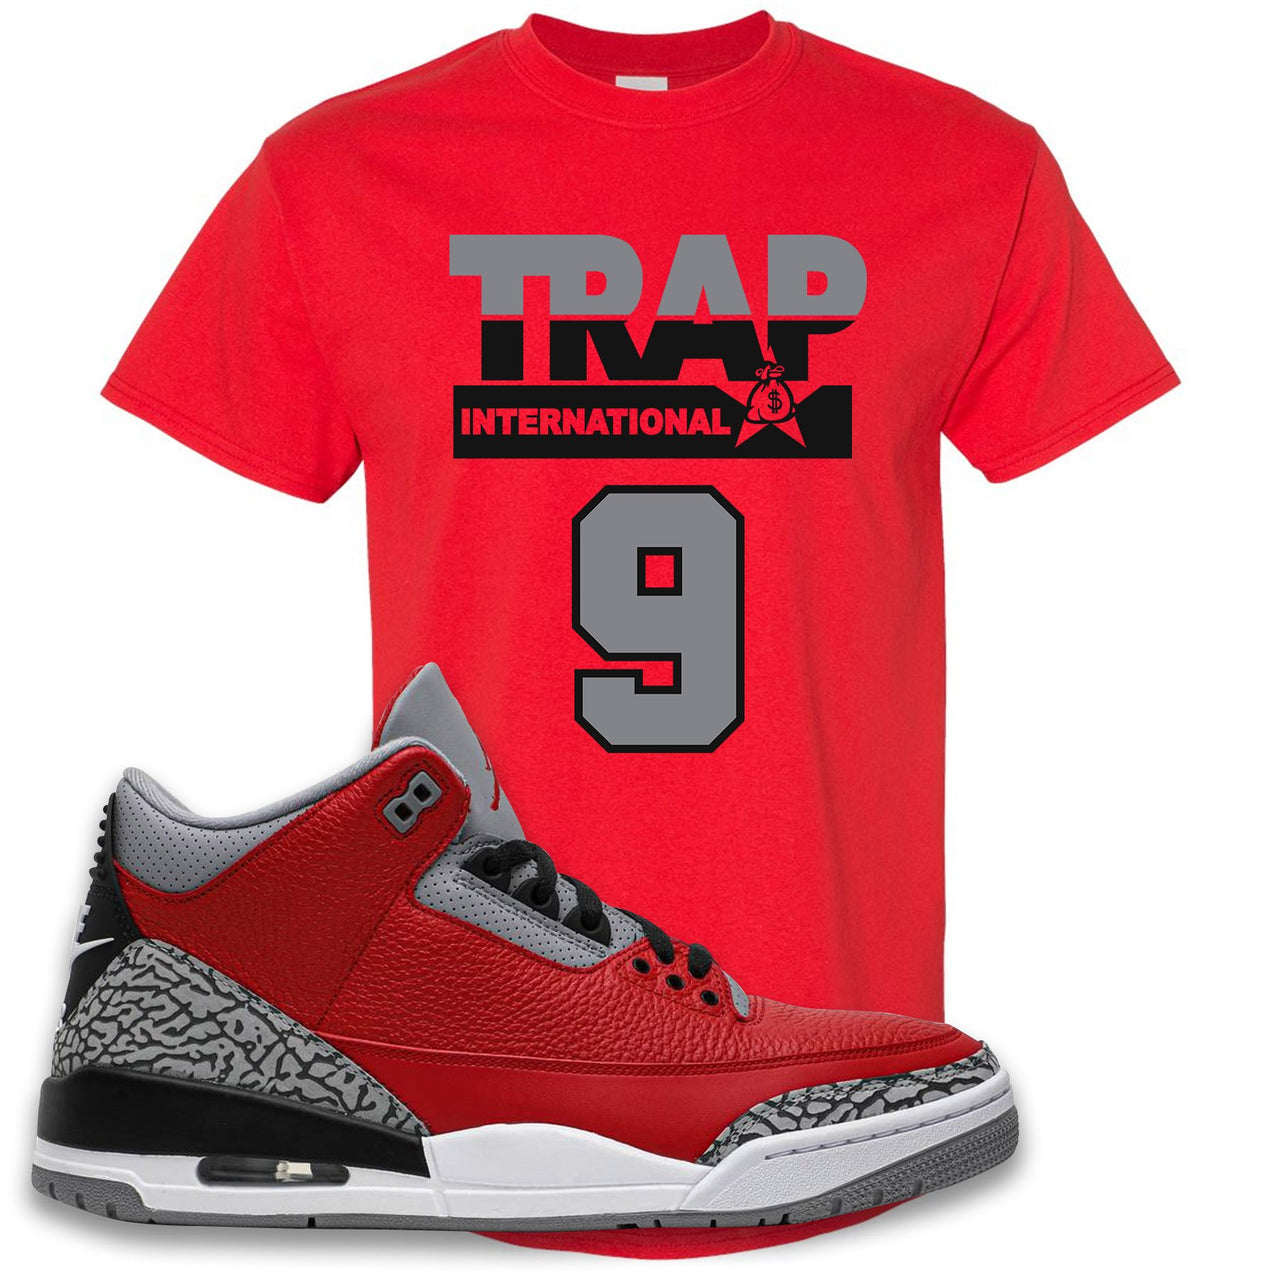 Jordan 3 Red Cement Chicago All-Star Sneaker True Red T Shirt | Tees to match Jordan 3 All Star Red Cement Shoes | Trap International